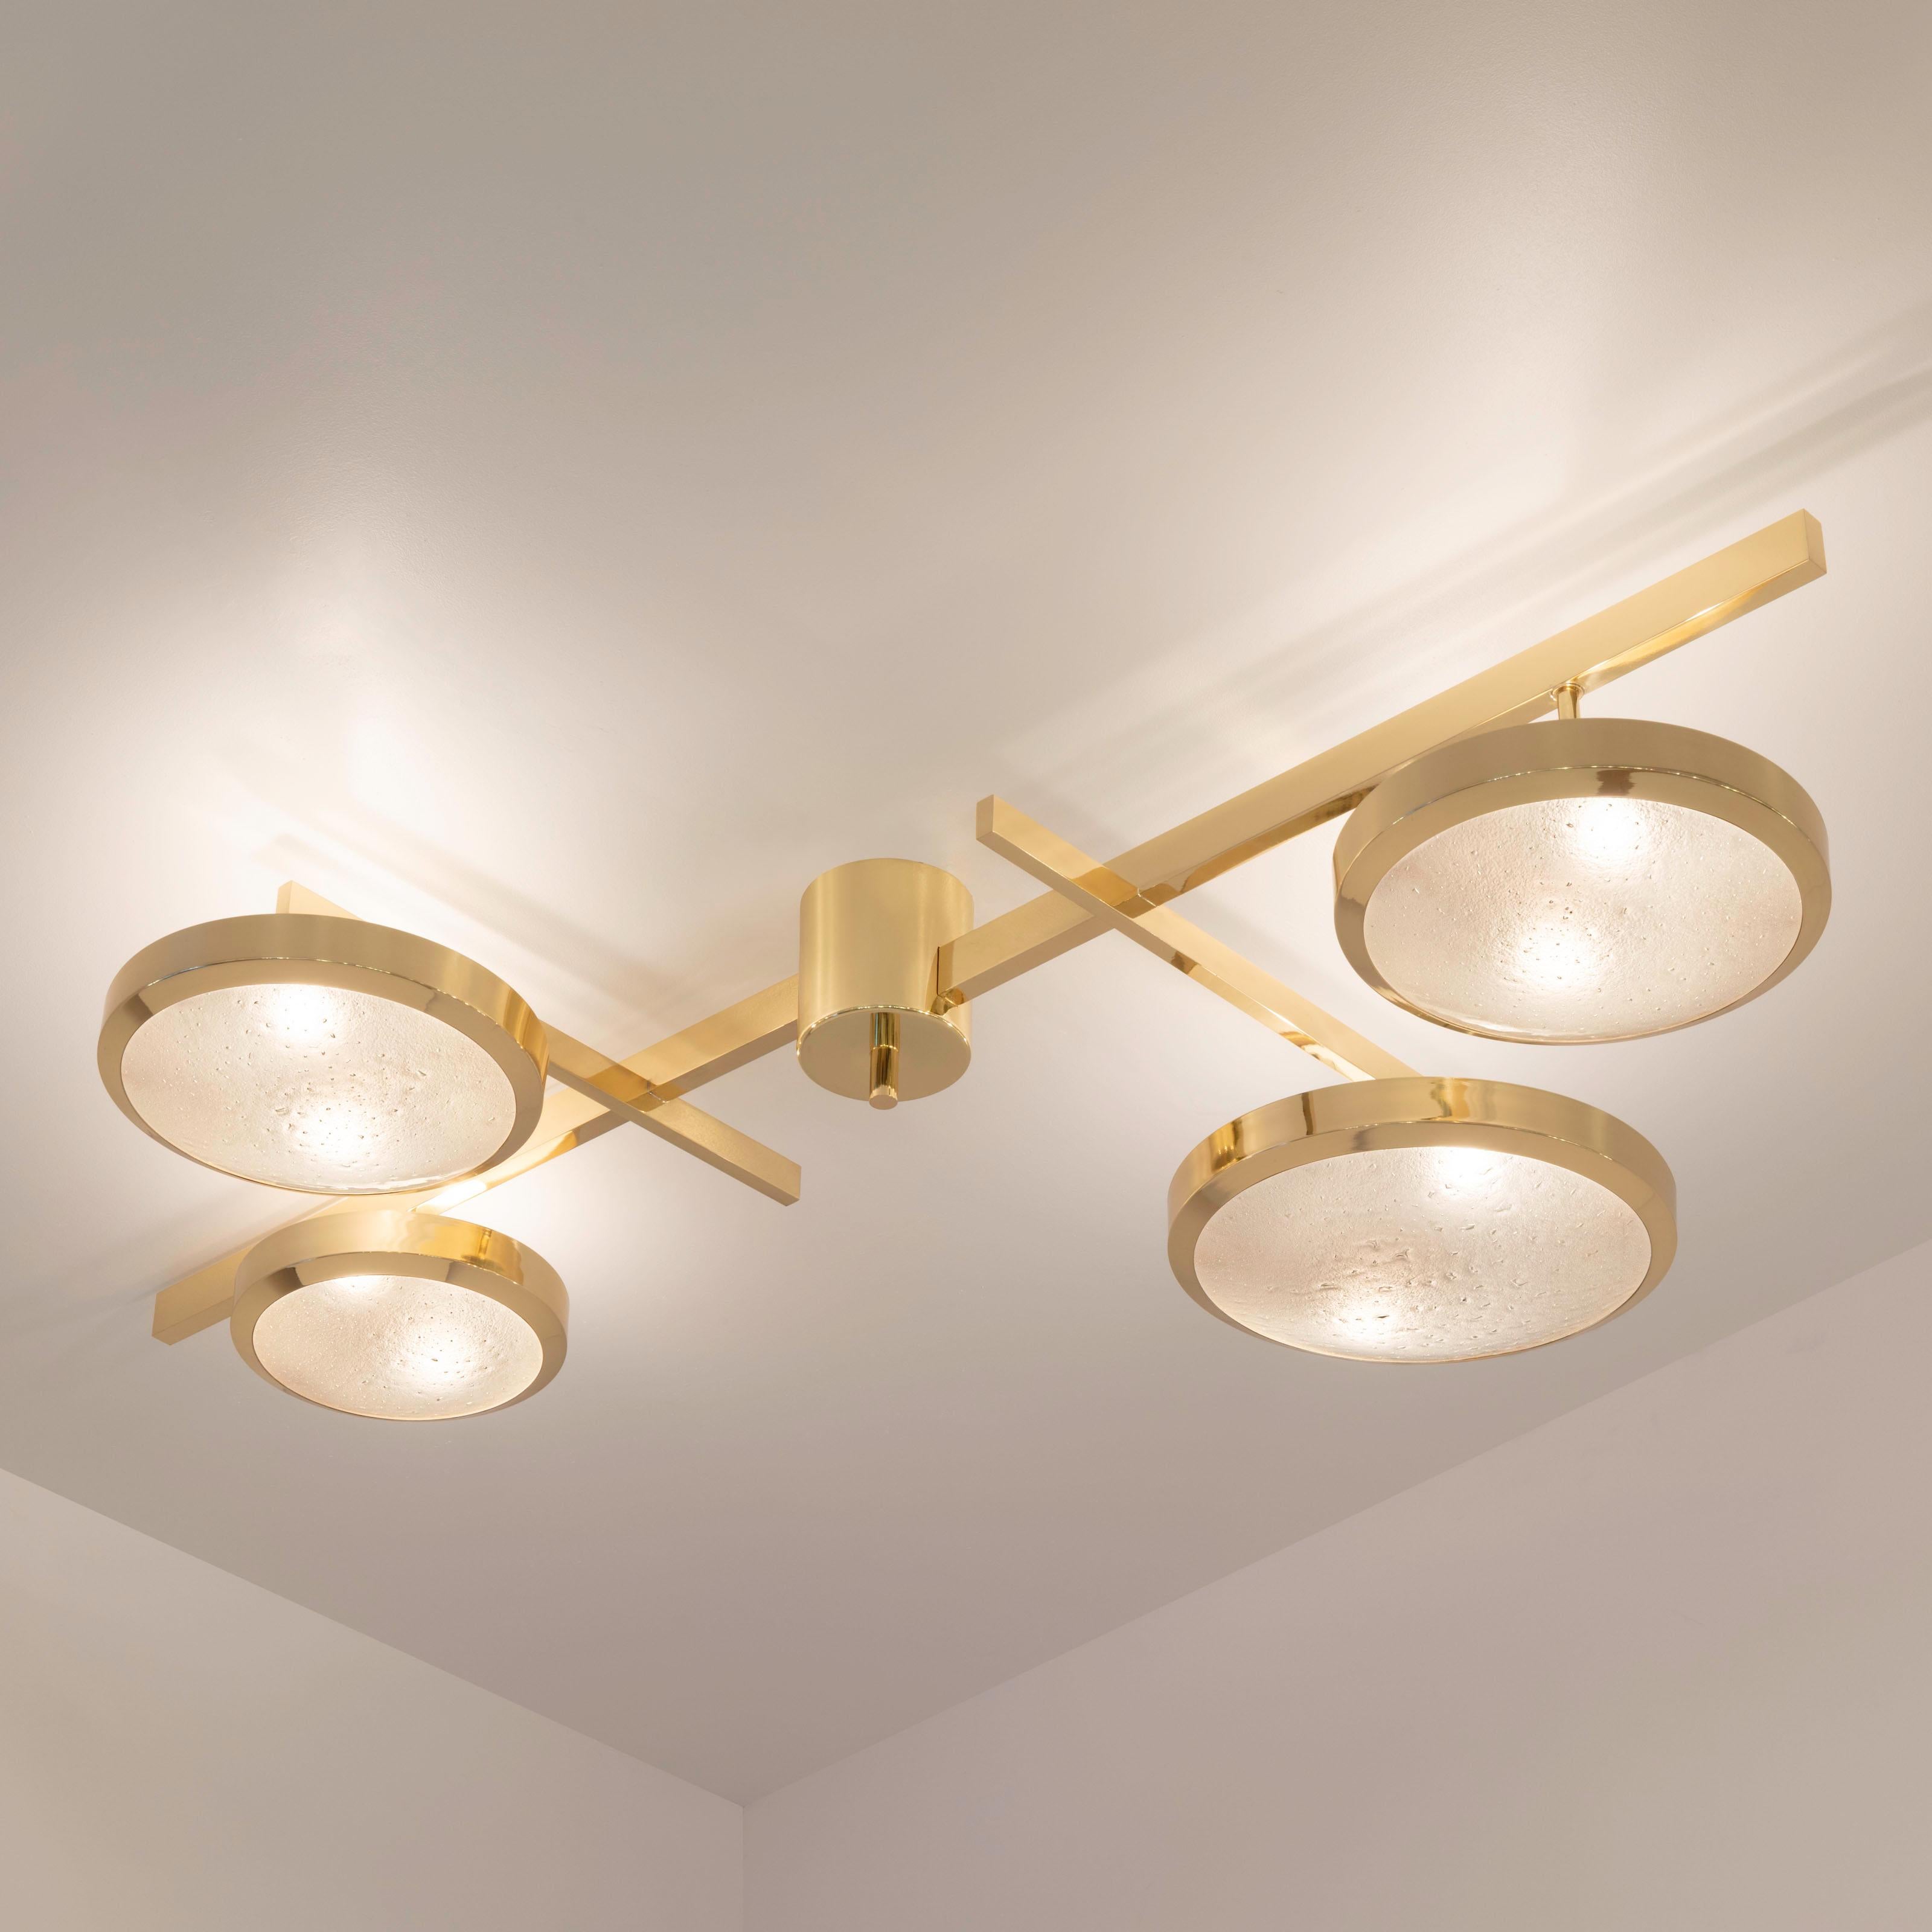 Tetrix Ceiling Light by Gaspare Asaro-Satin Brass Finish In New Condition For Sale In New York, NY